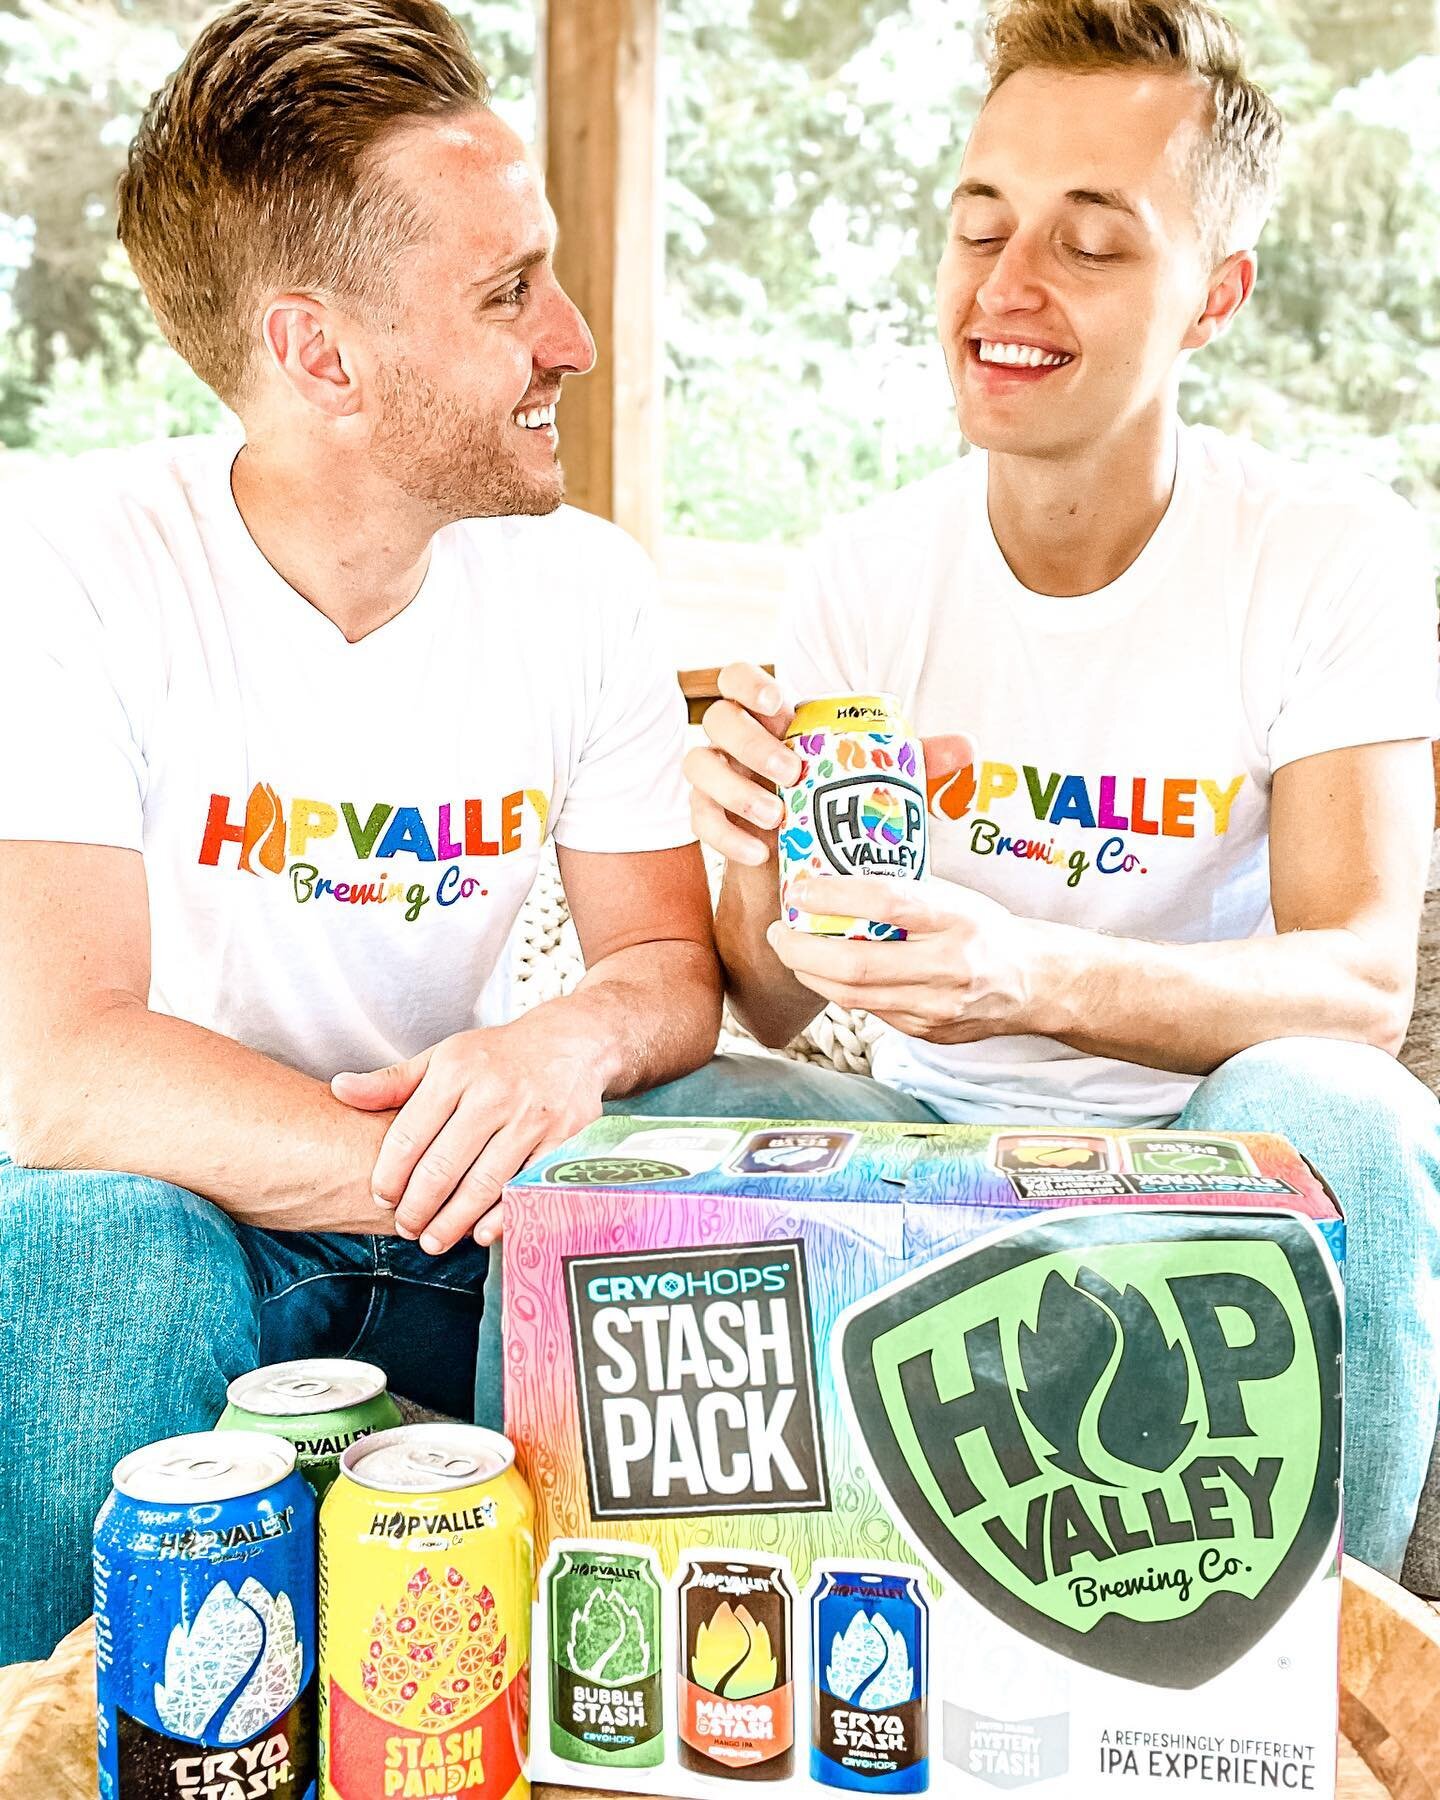 What better way to spend Pride than being with those you love celebrating all the rights and freedoms won by those who have come before us!
.
.
@hopvalleybrewing is committed to celebrating Pride alongside the LGBTQIA+ community and sent us a mix of 